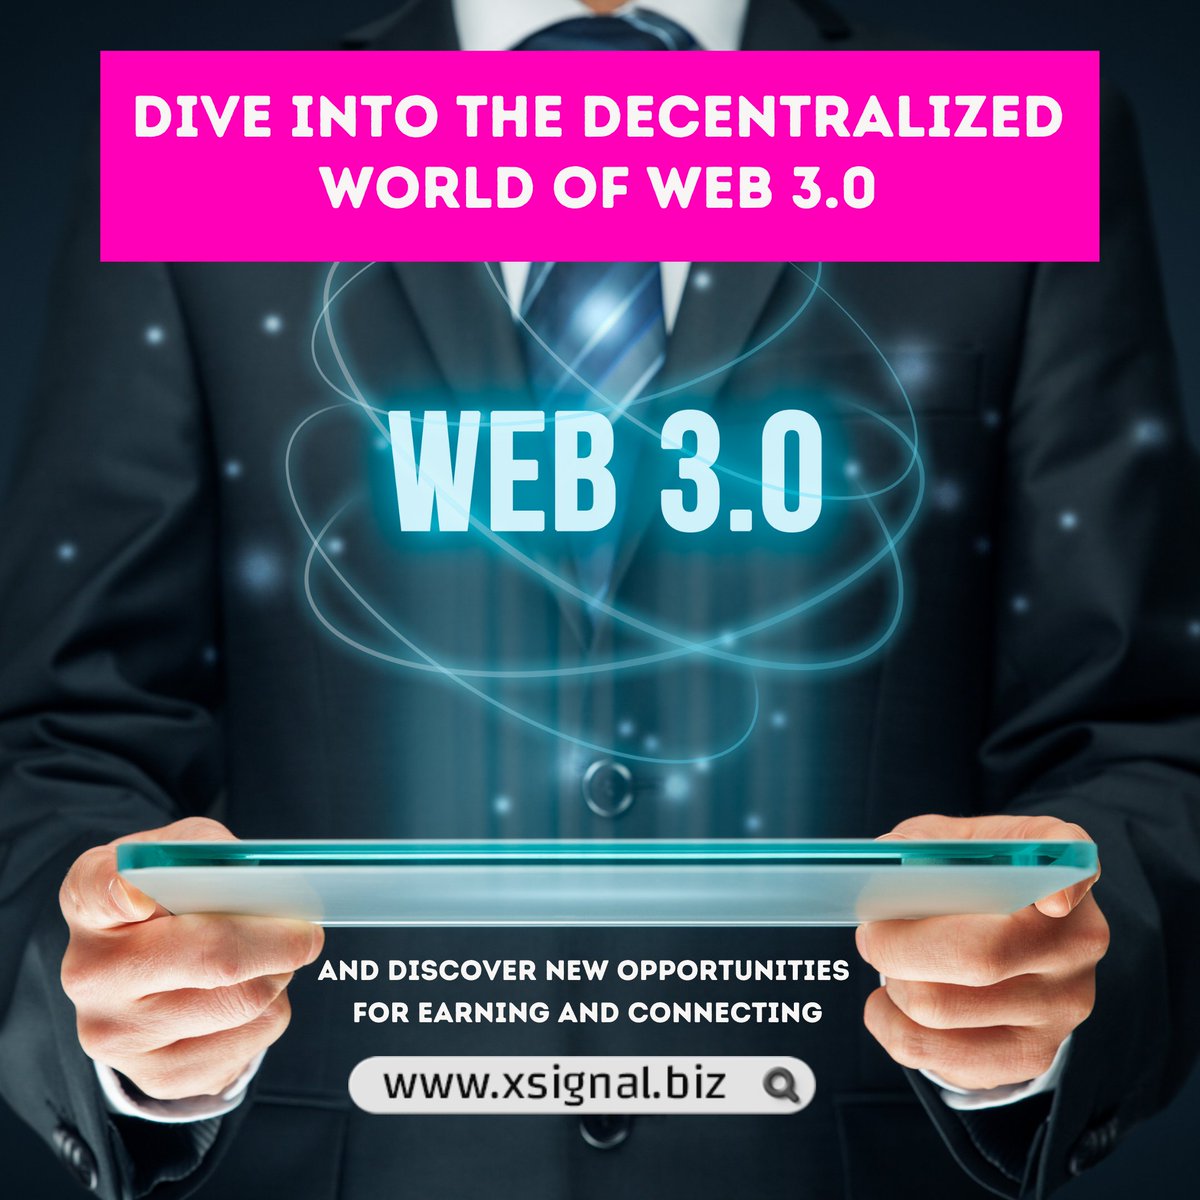 Dive into the decentralized world of Web 3.0 and discover new opportunities for earning and connecting. Get started now! #DecentralizedEconomy #Web3
#Xsignal #Growth #DigitalRevolution #web3 #NewFrontier #tech #opportunity #success